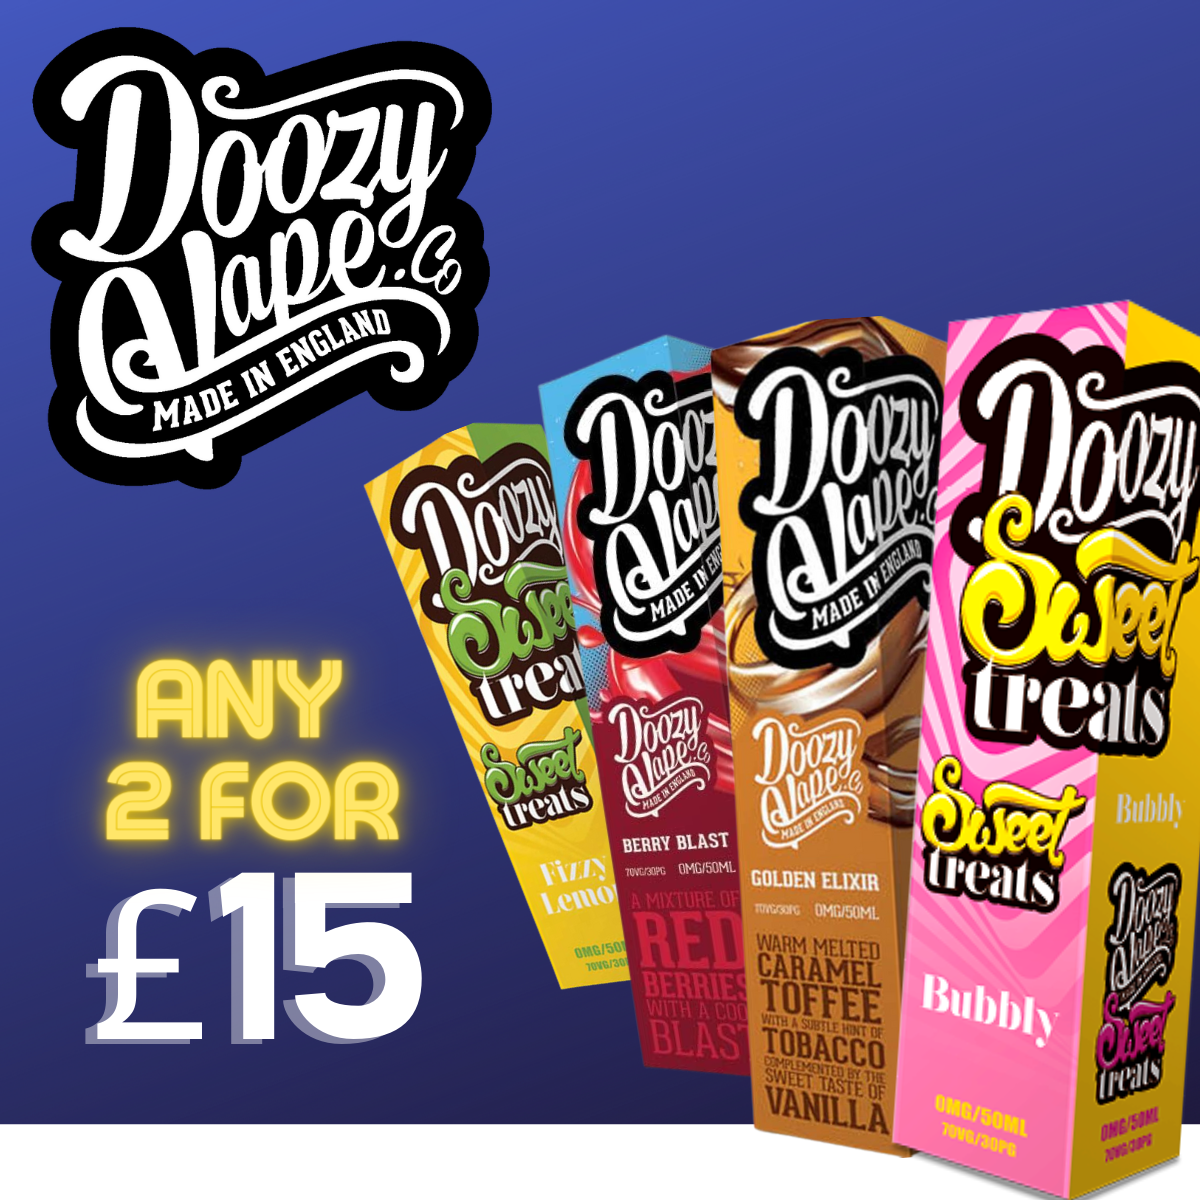  Doozy shortfills come in a 60 ml bottle with 50 ml of e-liquid and space to add a 10 ml nicotine shot, as well as a child proof cap for peace.